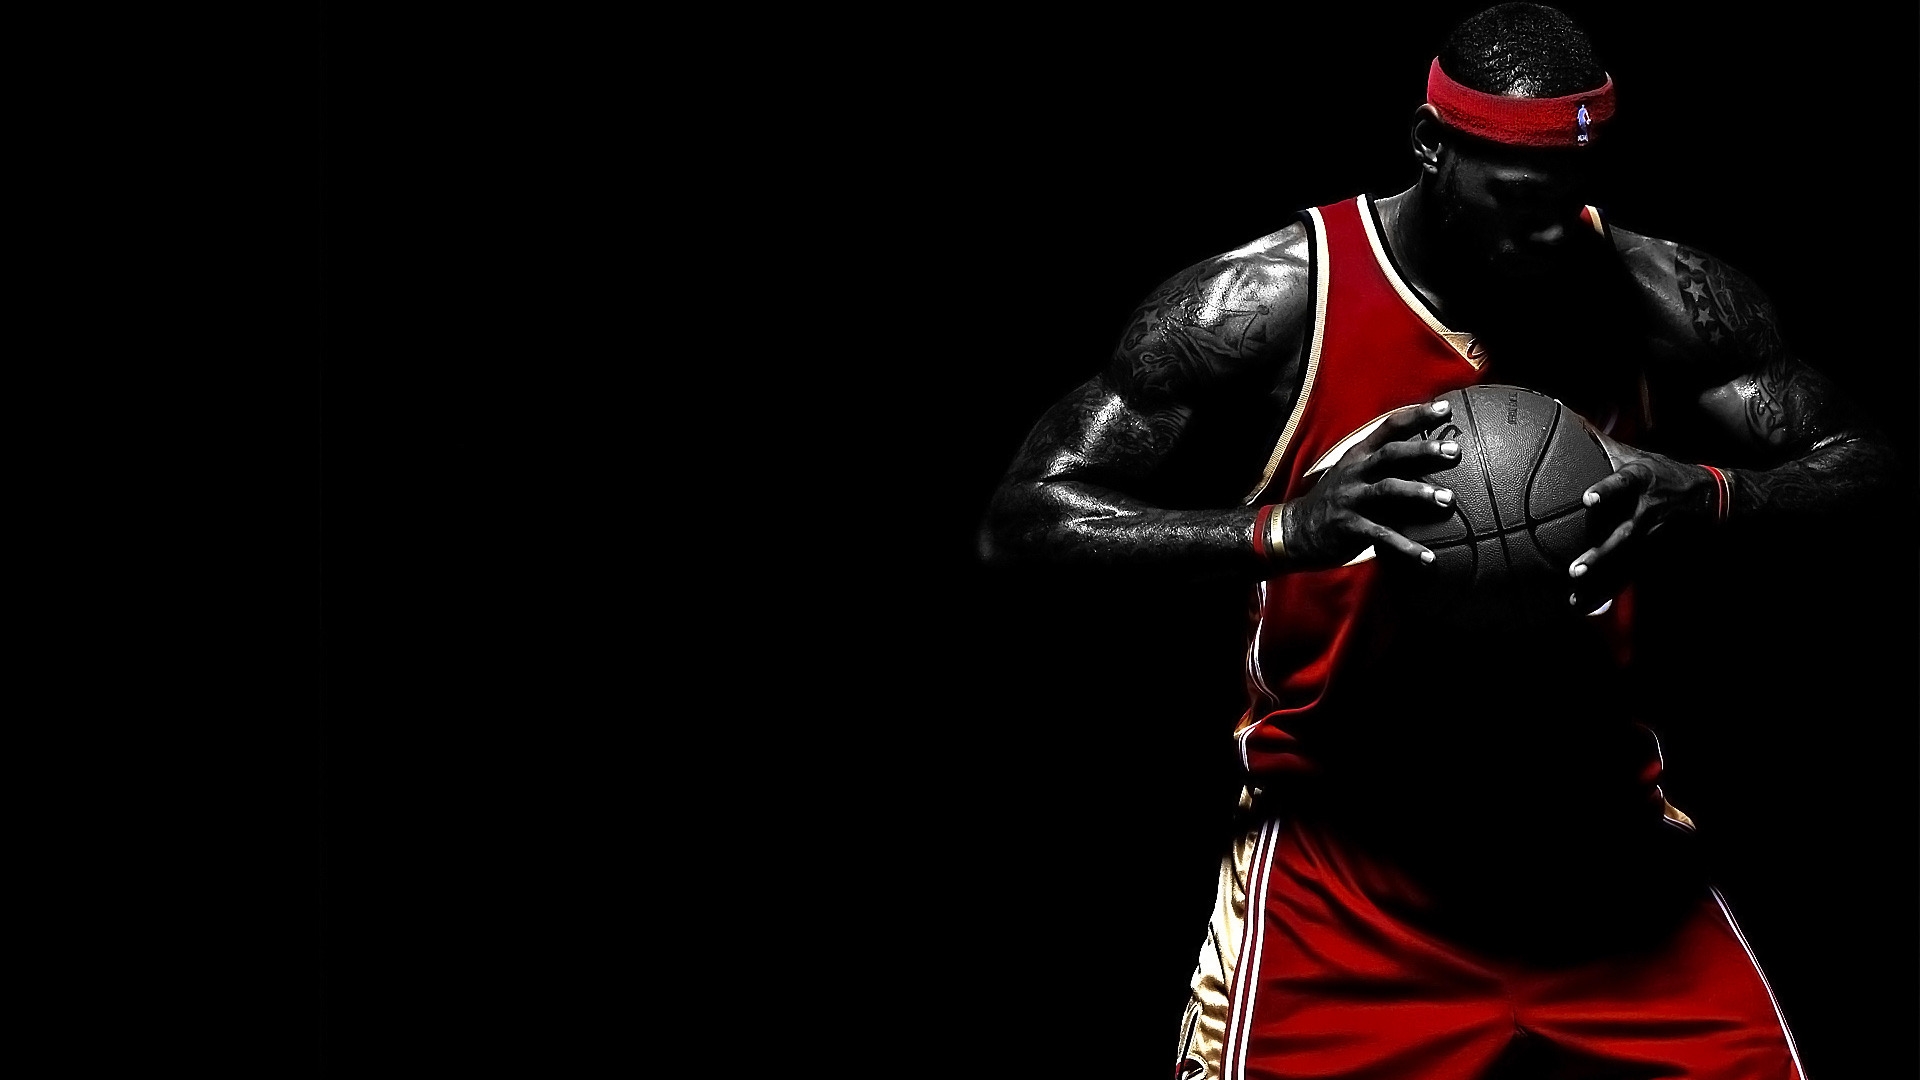 Lebron James Thinking for 1920 x 1080 HDTV 1080p resolution